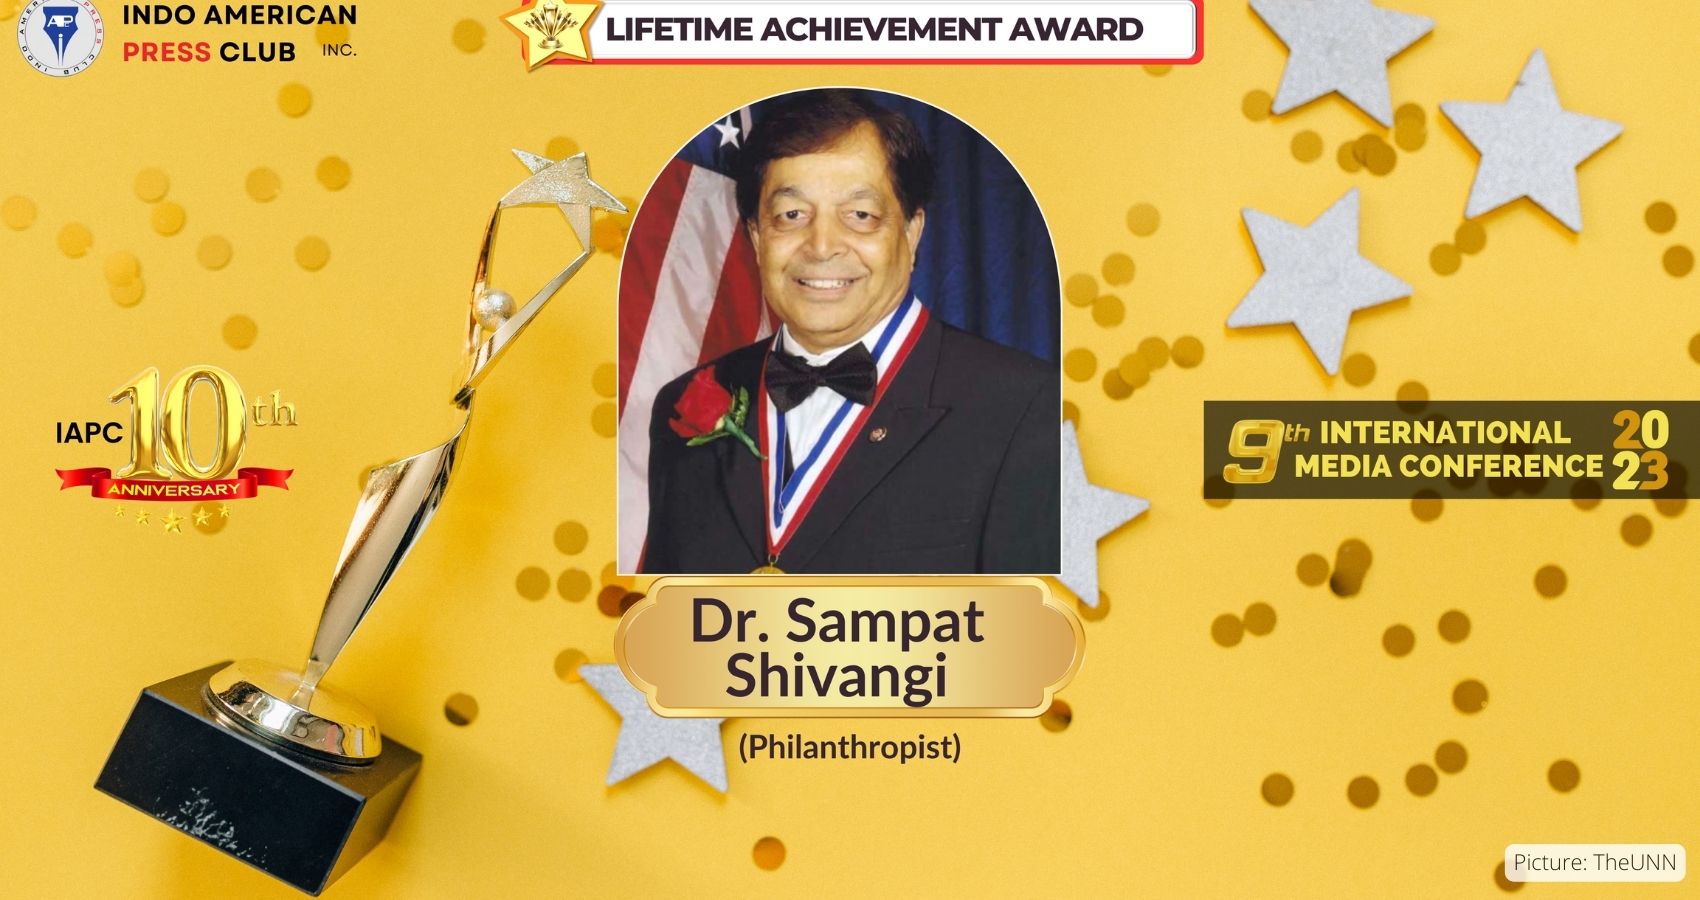 Dr. Sampat Shivangi Honored With Lifetime Achievement Award By Indo-American Press Club